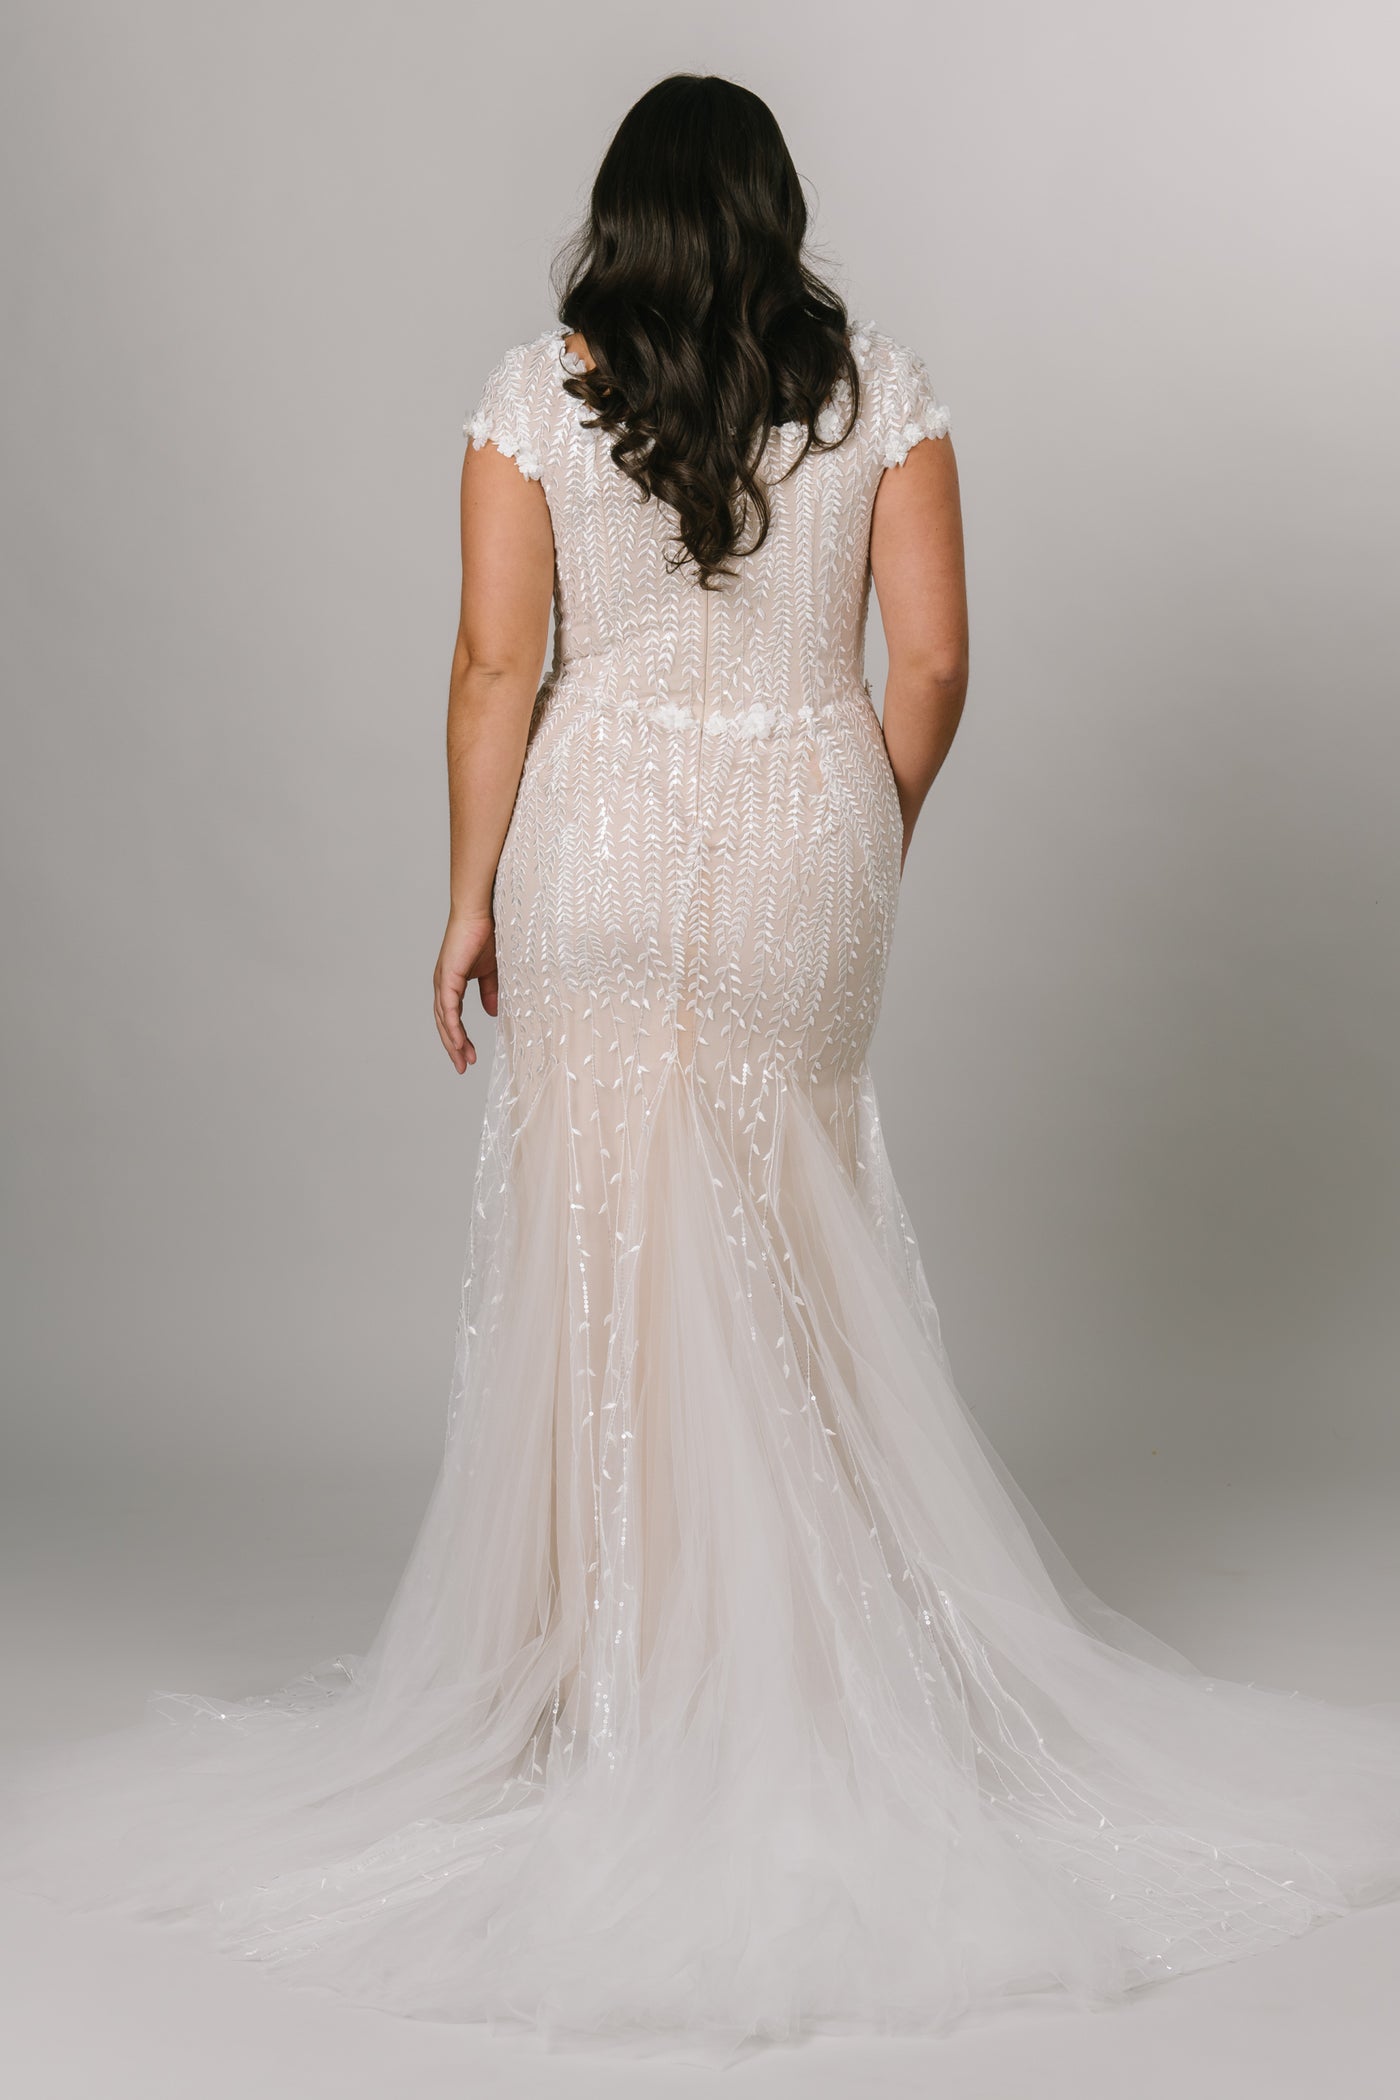 Plus size modest wedding dress, fitted silhouette with a square neckline. Champagne color underlining color with a delicate lace overtop.  